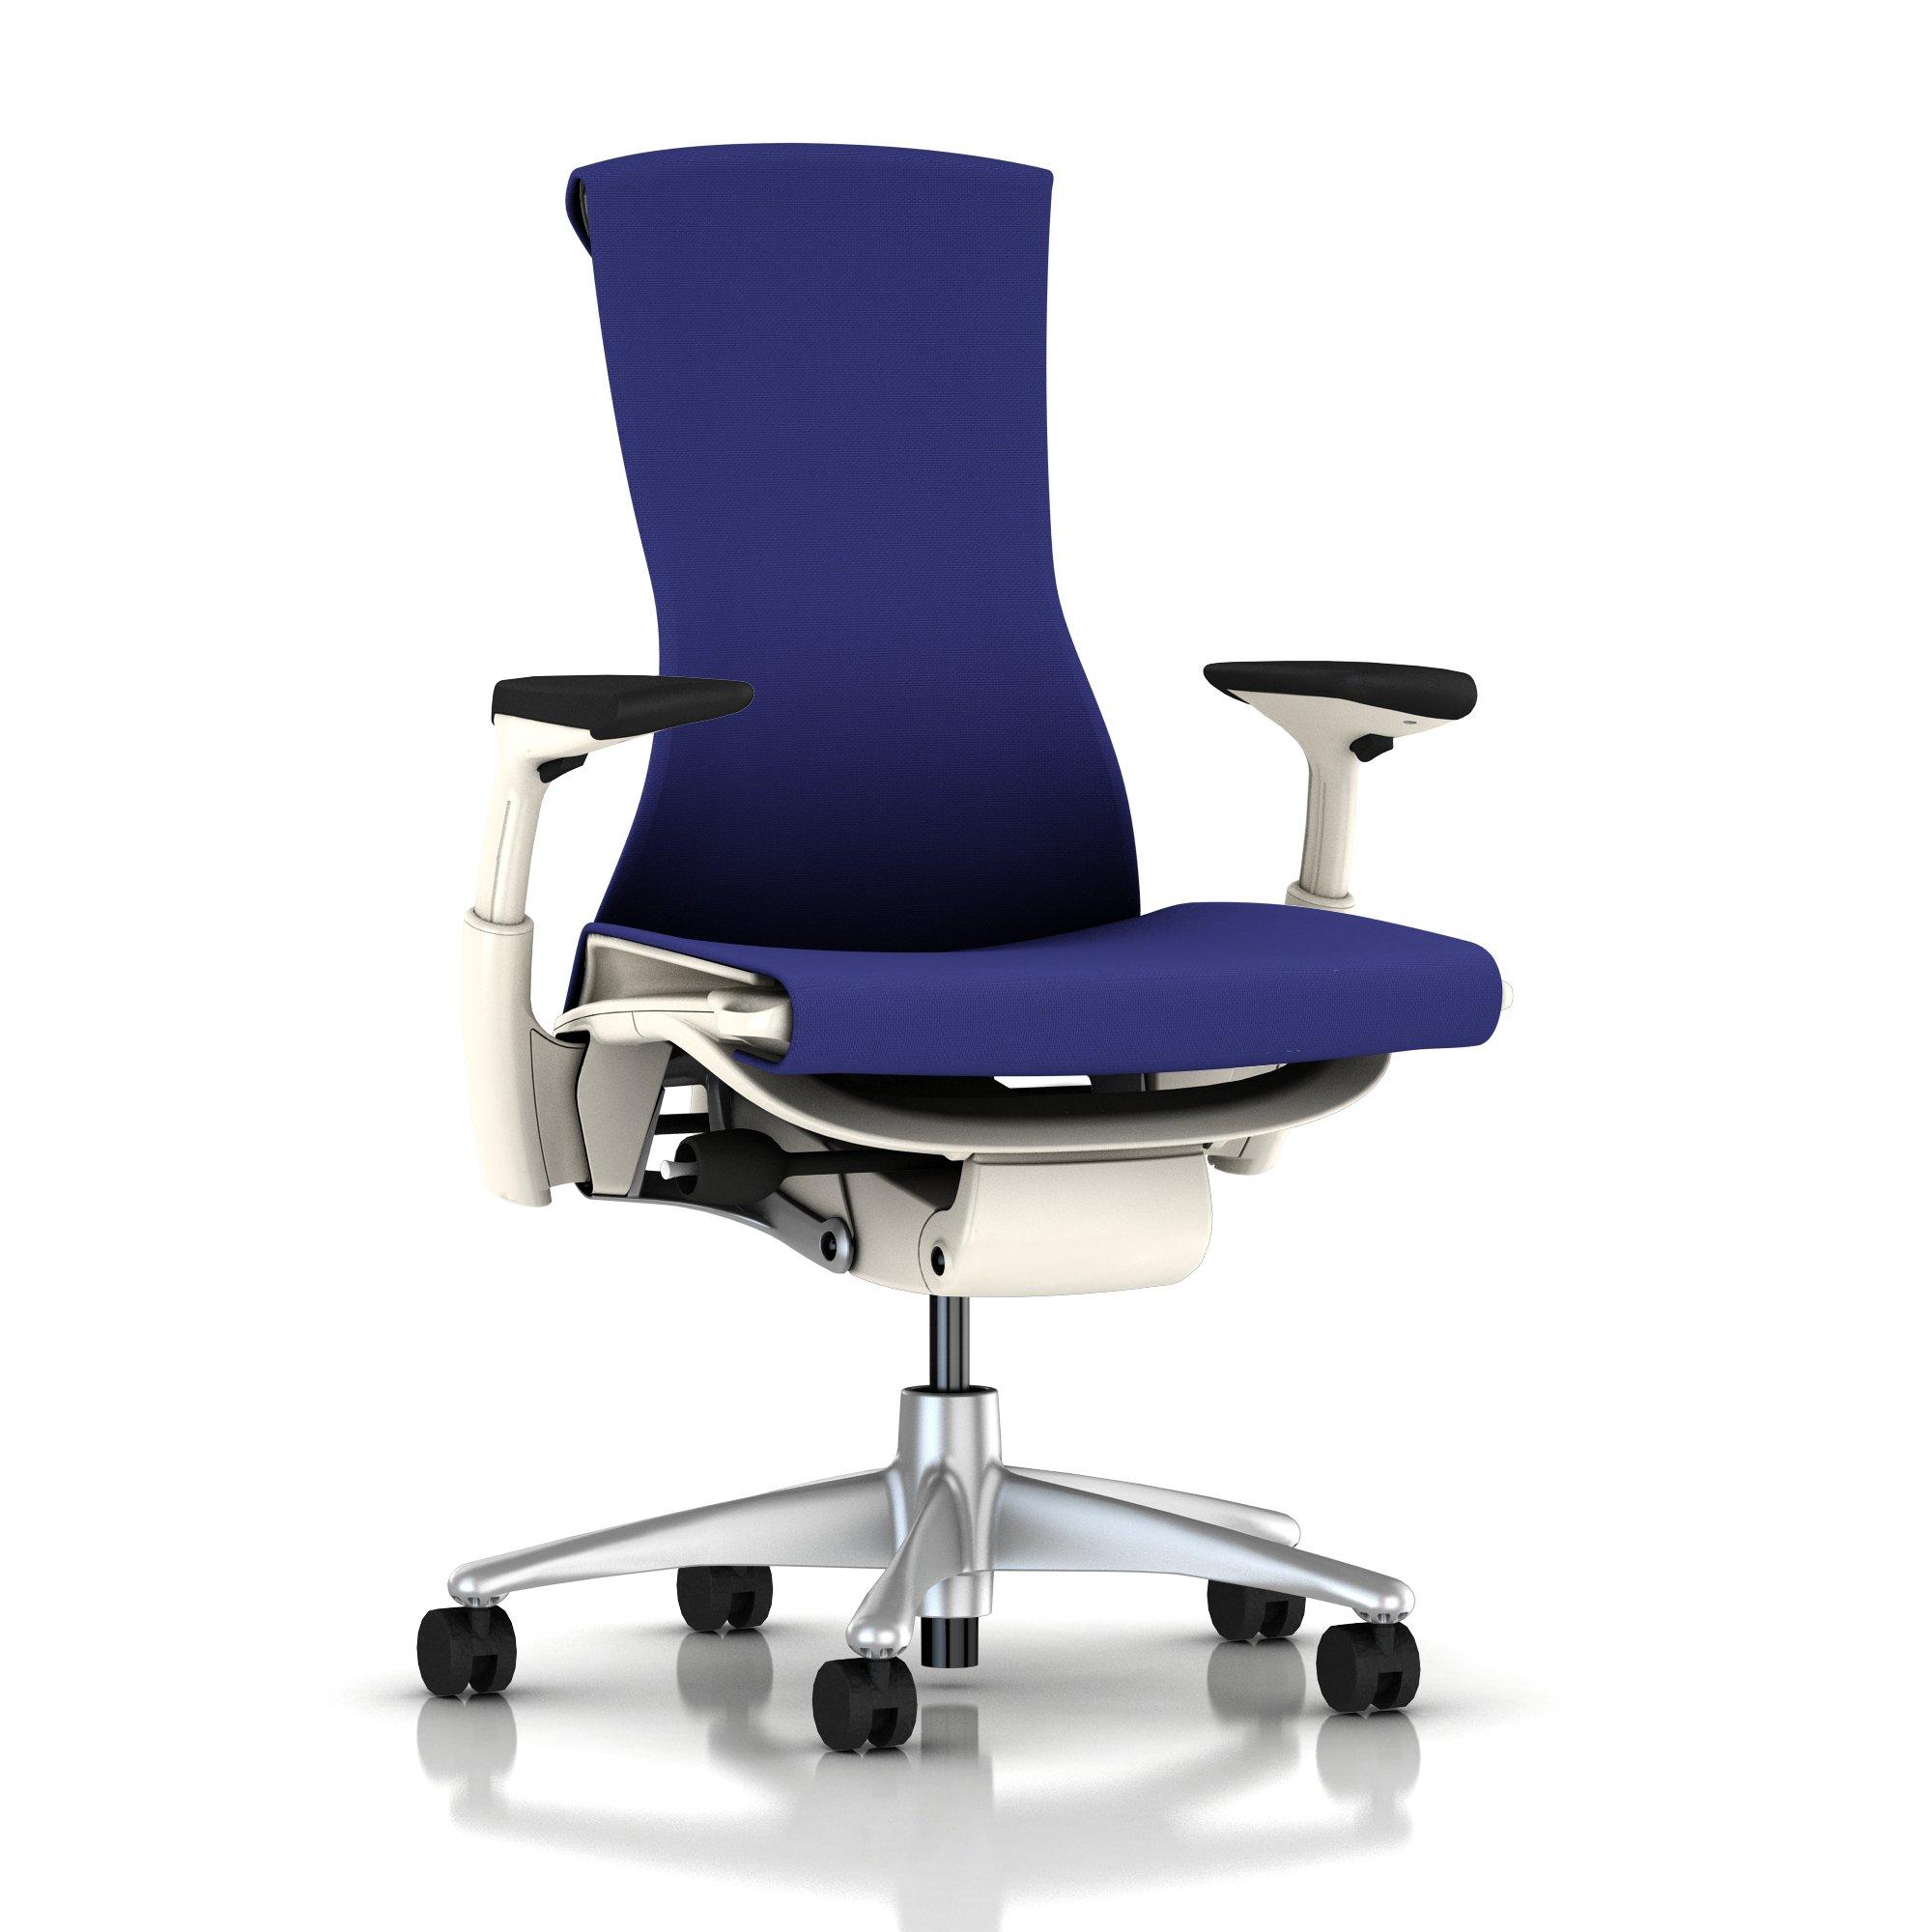 Embody Chair Iris Blue Rhythm with White Frame and Titanium Base by Herman Miller